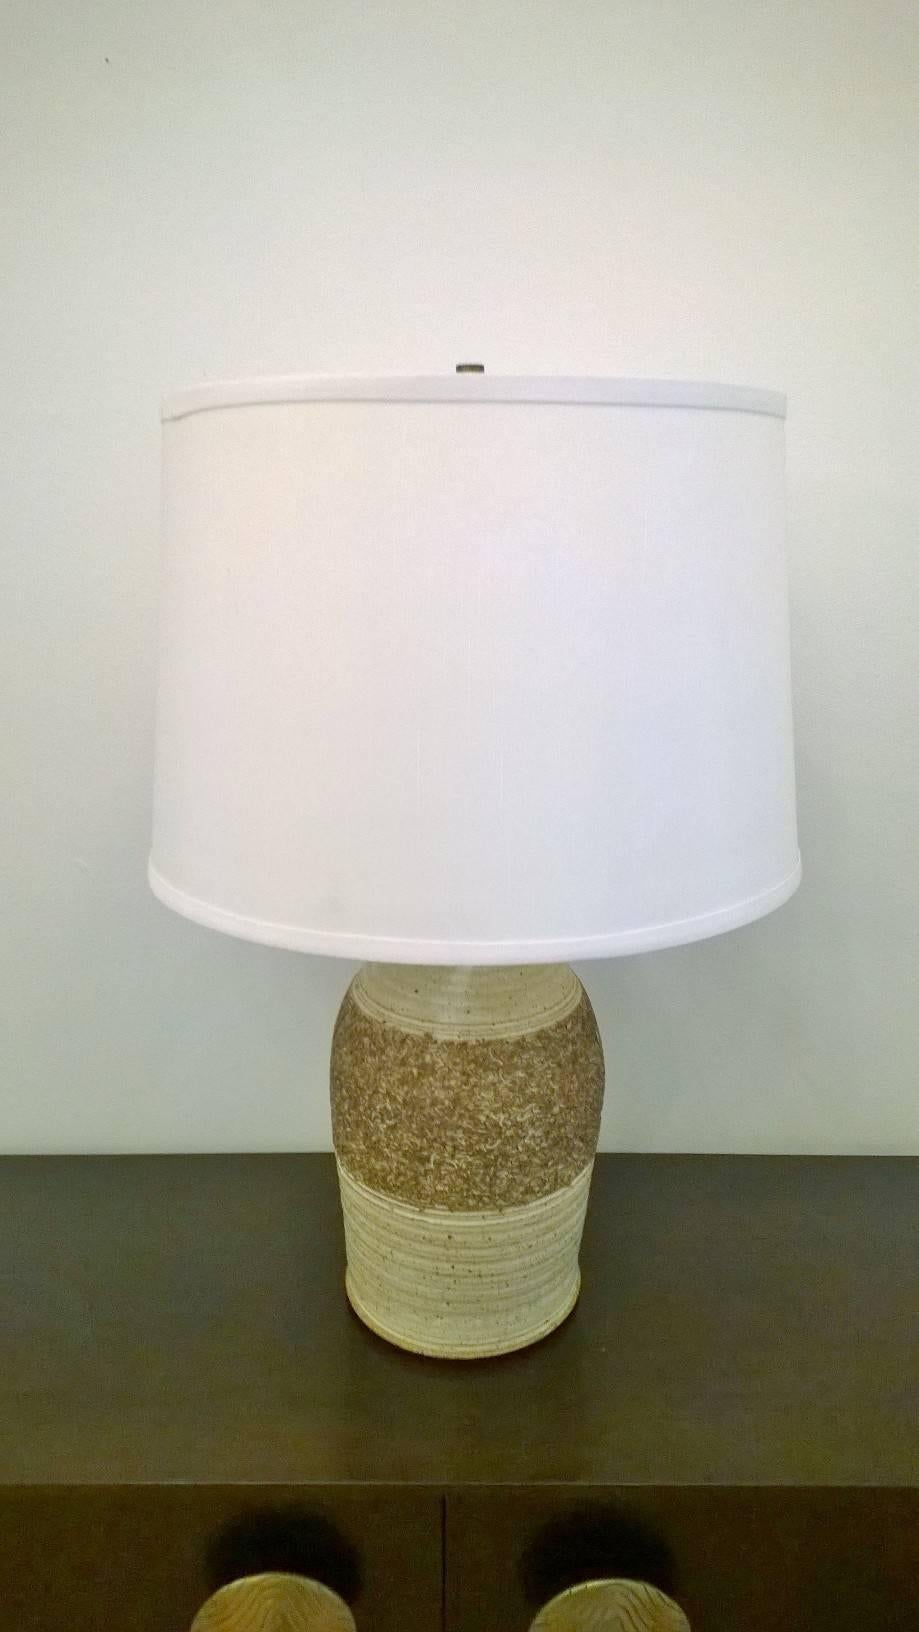 An original pair of 1960s American art pottery table lamps in earth tone colors of cream and brown. They have aged brass fittings. The ceramic bodies are handmade and differ slightly with their top necks. They are the same size and color. Newly